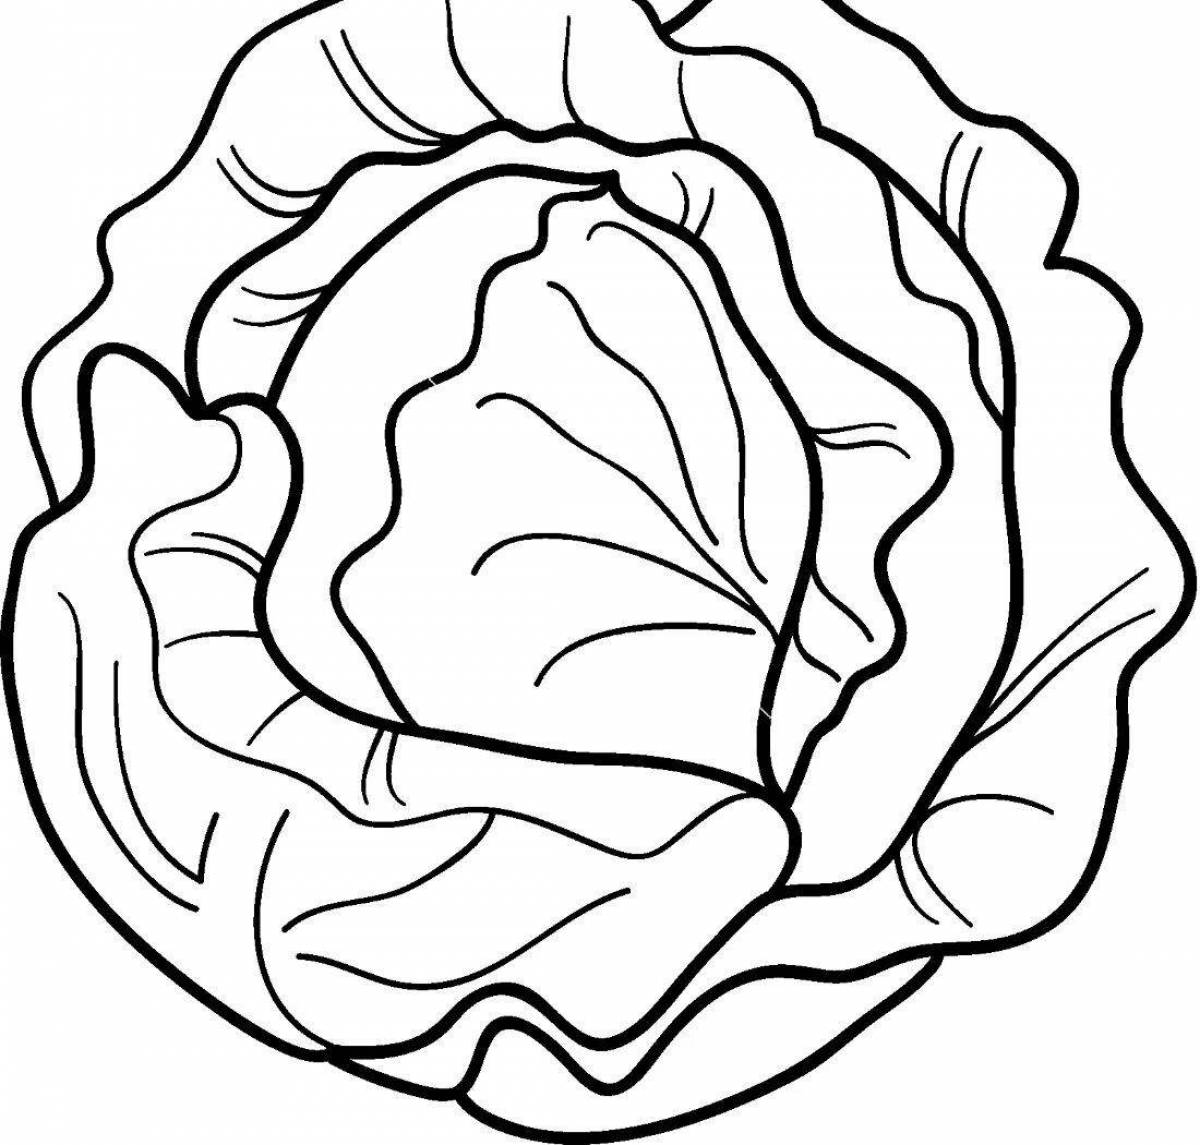 Live cabbage coloring for kids